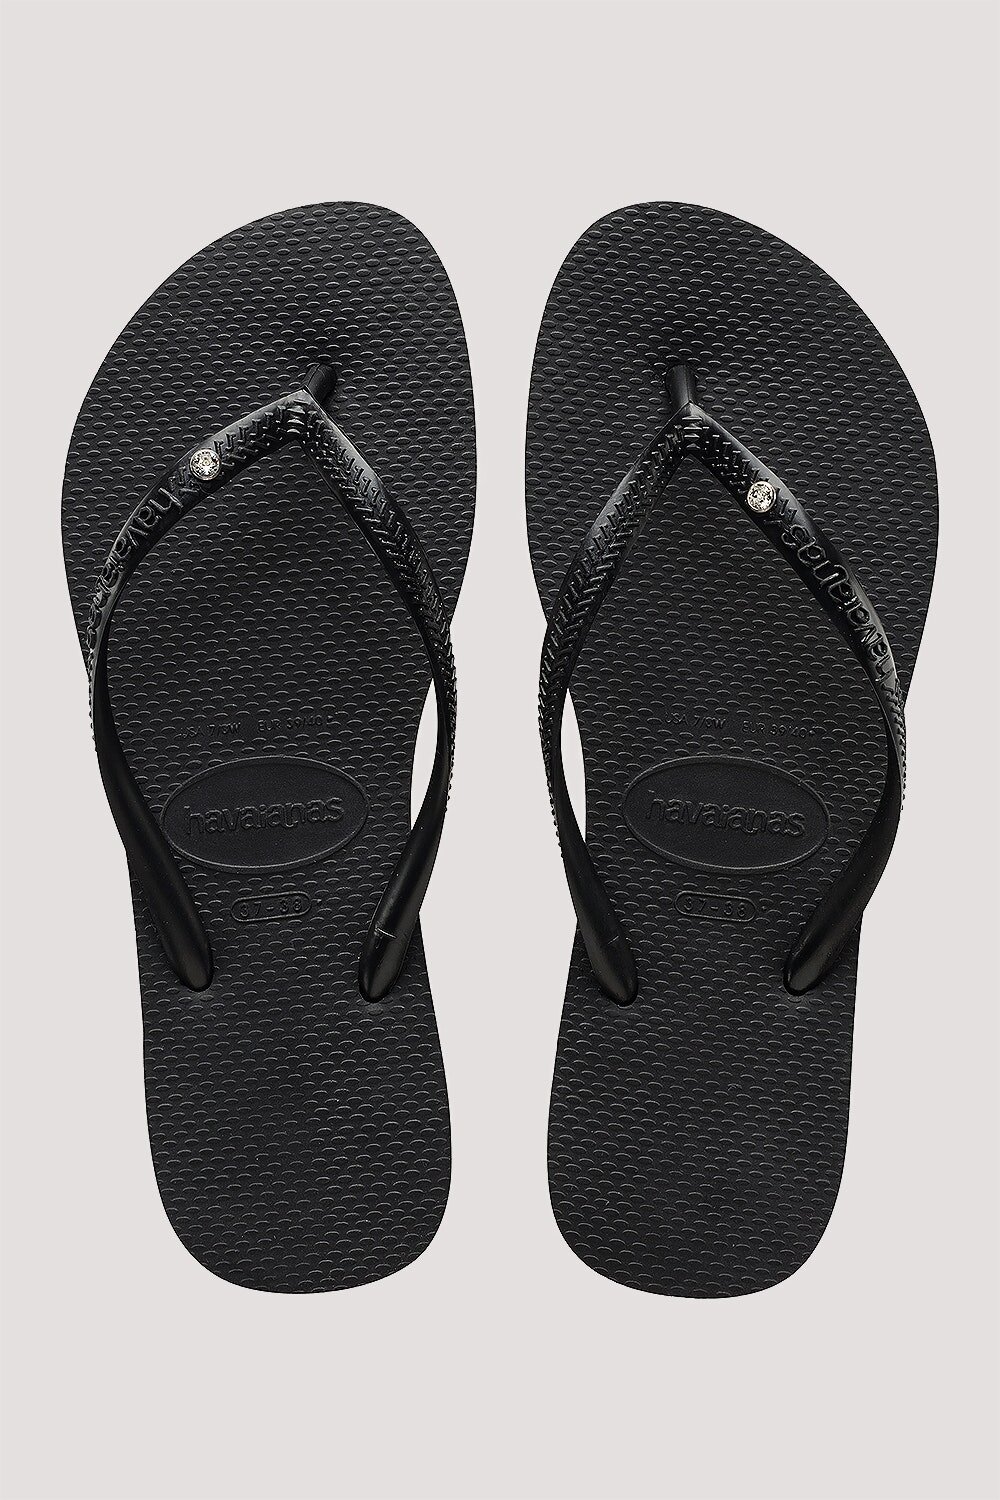 Havaianas Slim Crystal Jandals - Accessories-Shoes : Preview & District ...